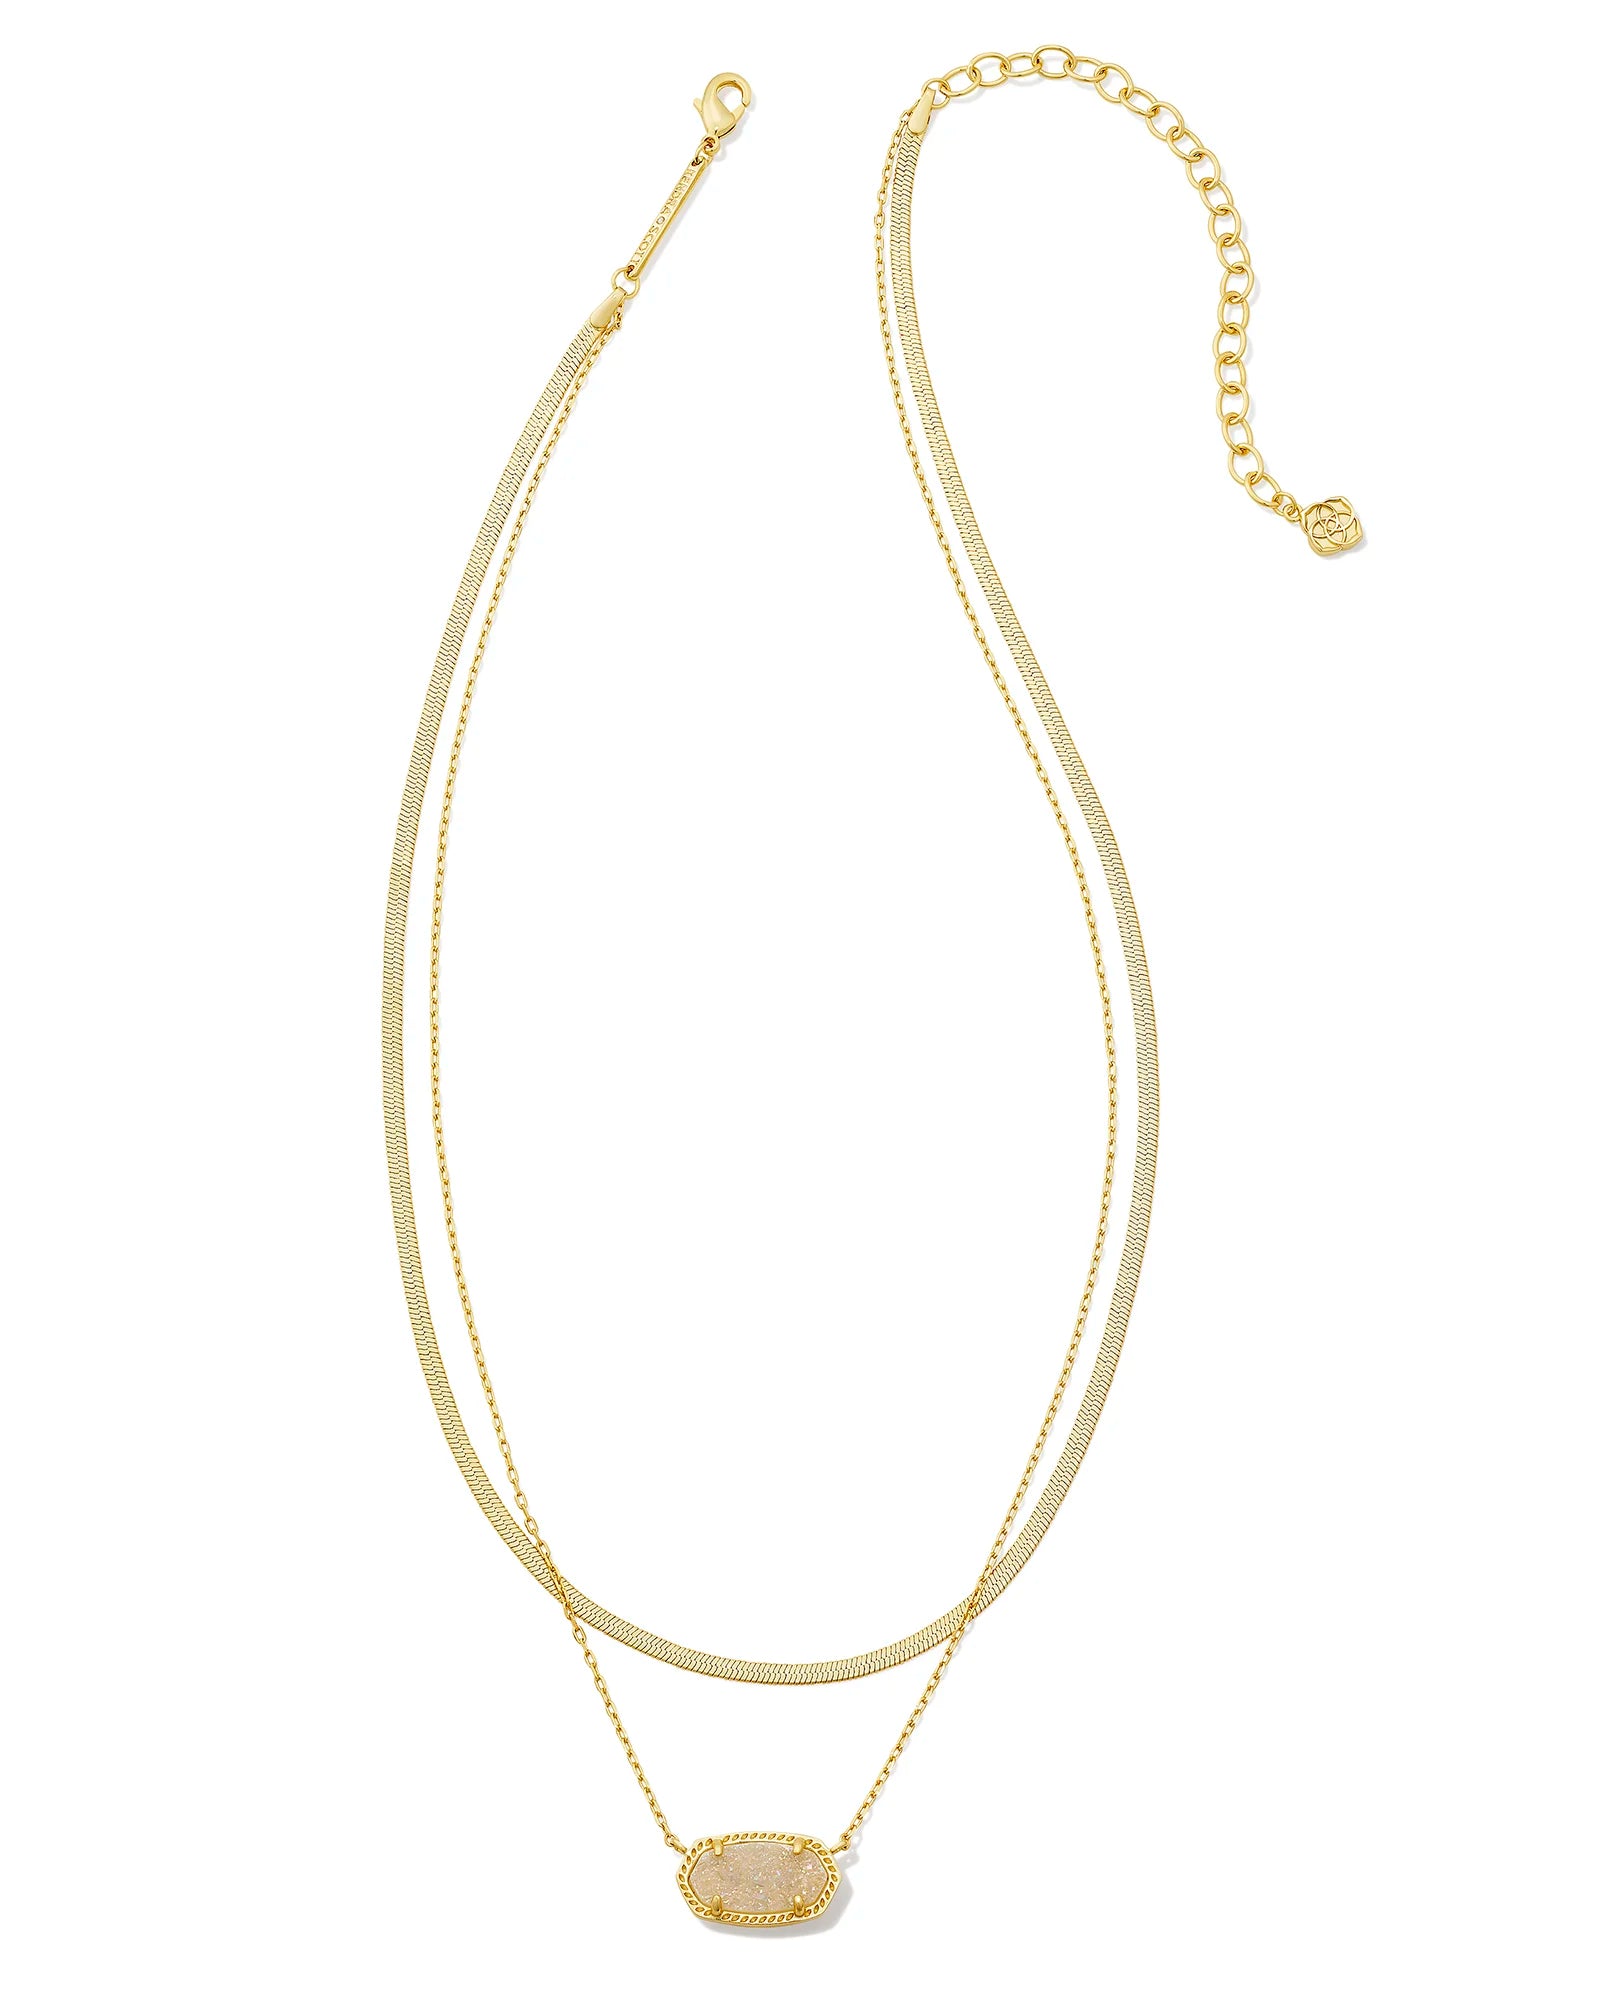 Kendra Scott | Elisa Herringbone Gold Multi Strand Necklace in Iridescent Drusy - Giddy Up Glamour Boutique